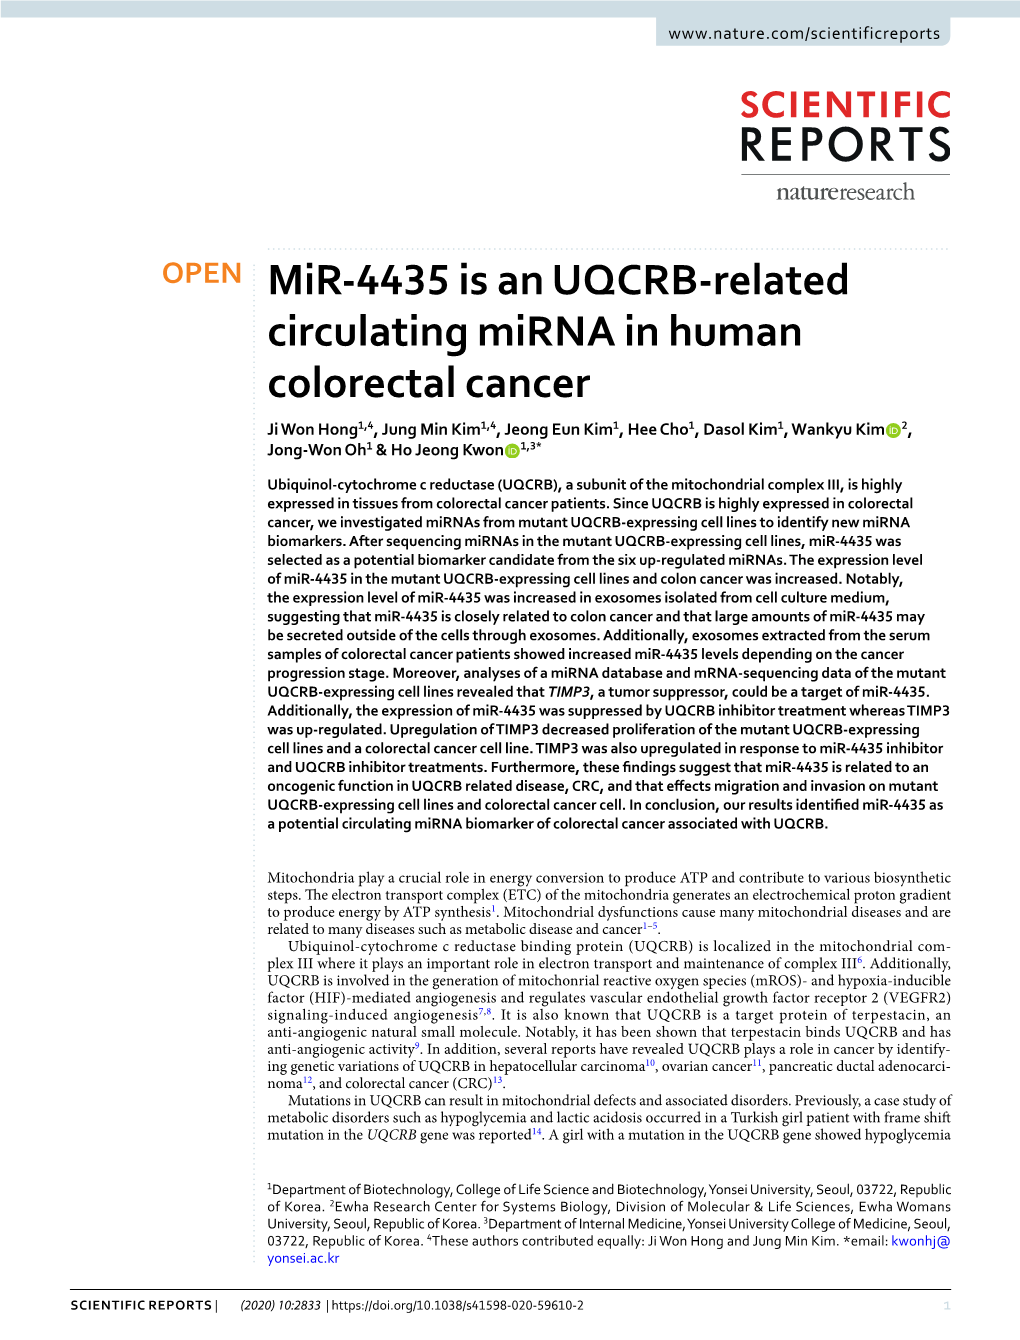 Mir-4435 Is an UQCRB-Related Circulating Mirna in Human